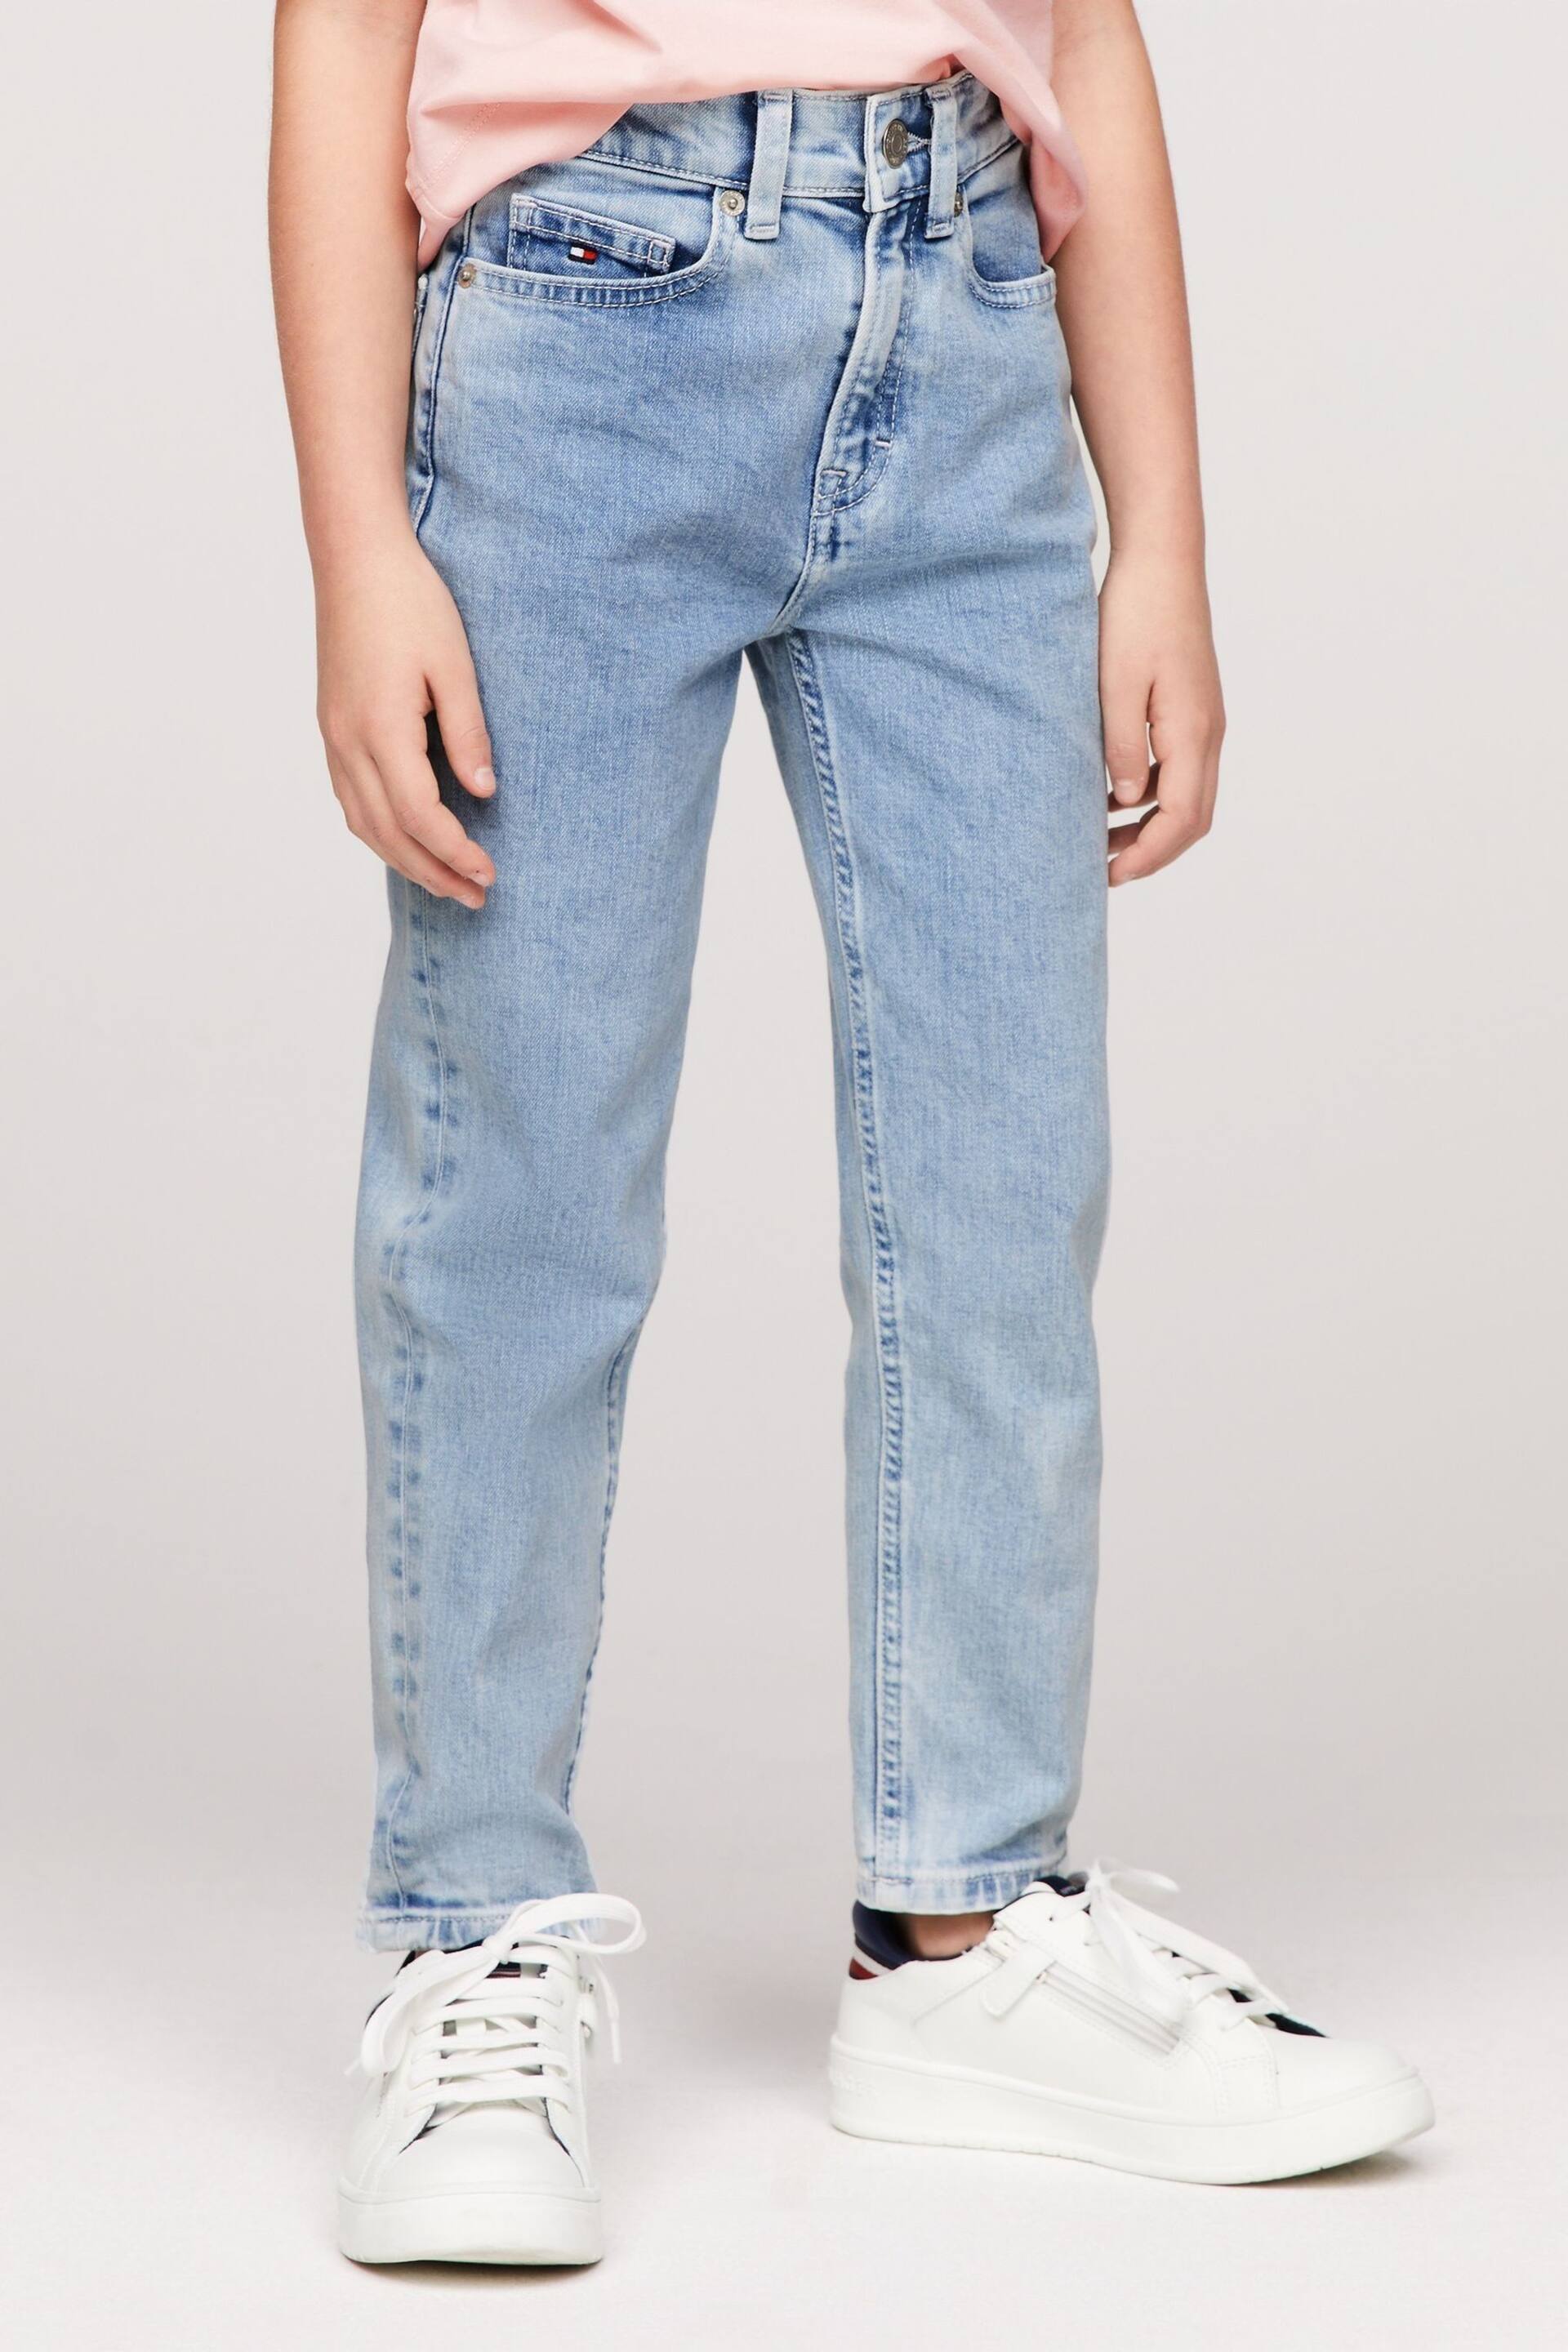 Tommy Hilfiger Blue High Rise Tapered Jeans - Image 1 of 5